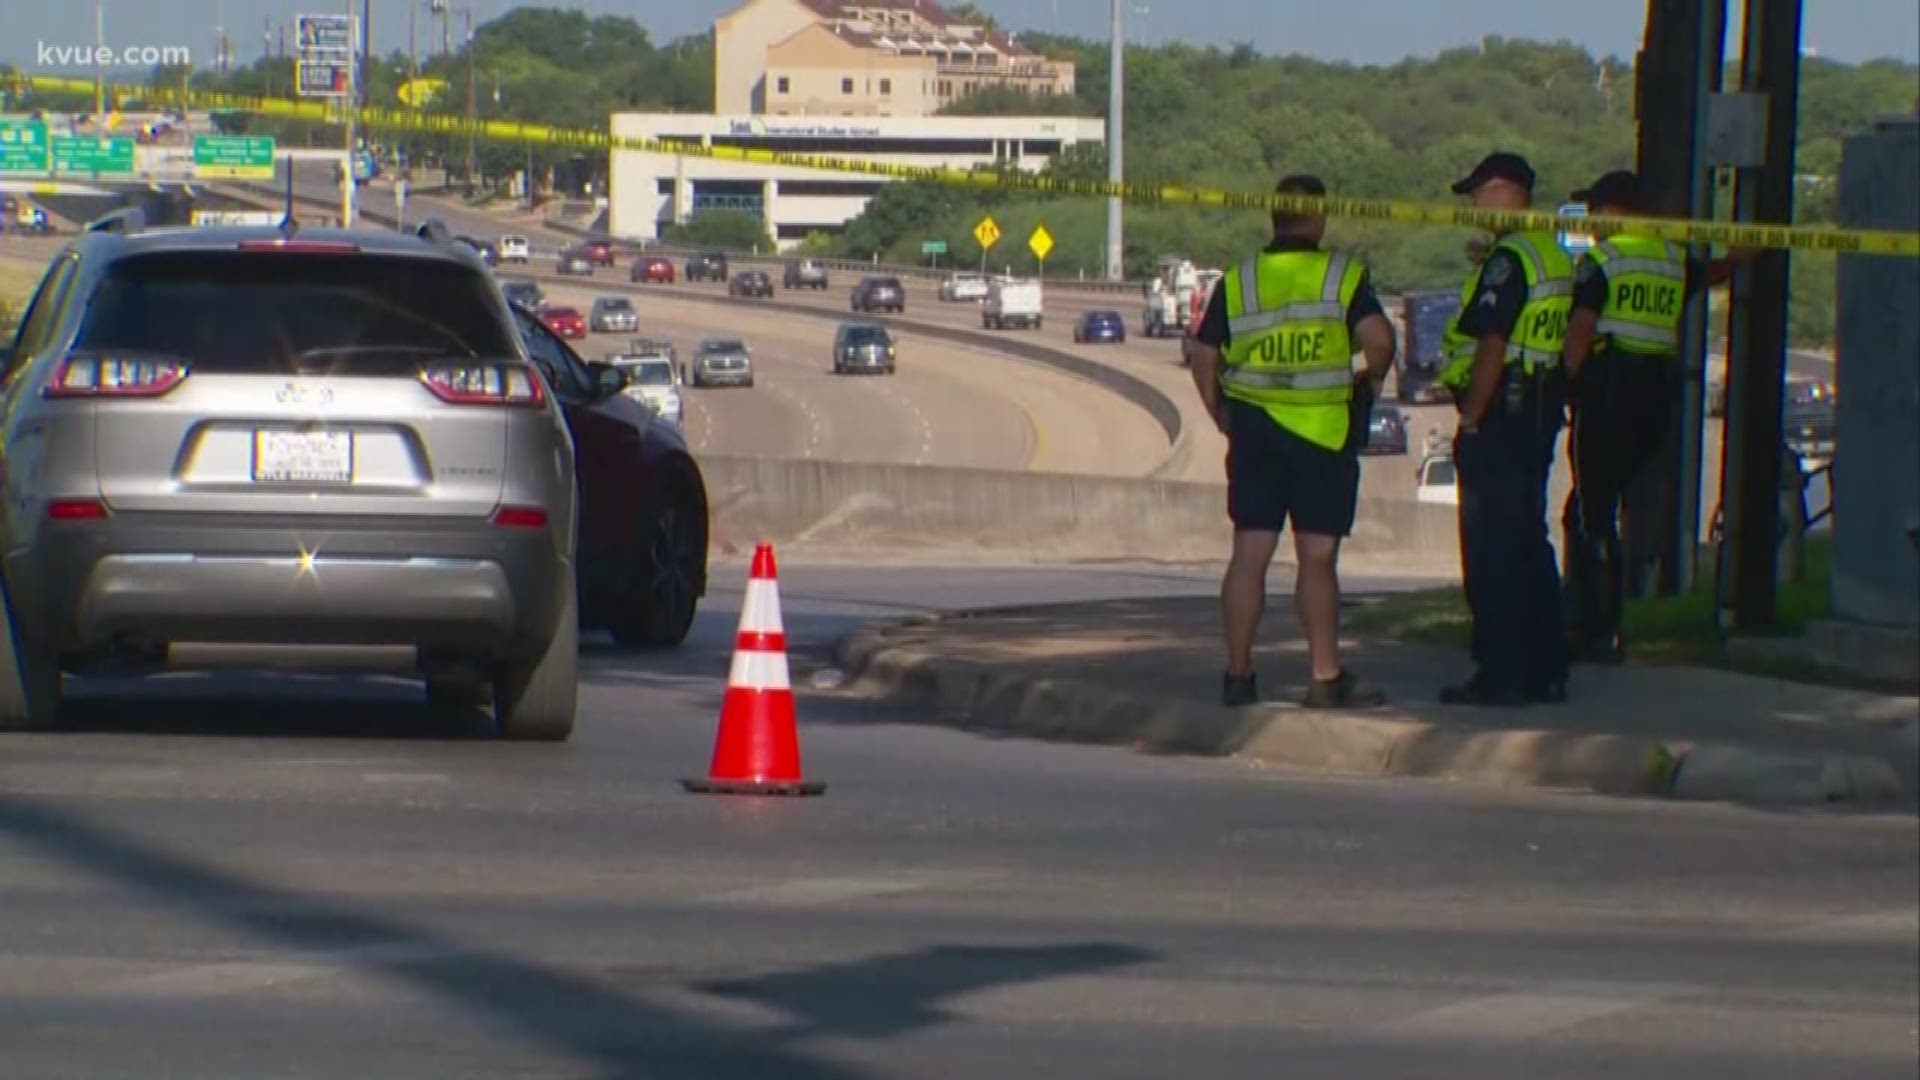 Family sues suspect after deadly hit-and-run in Austin